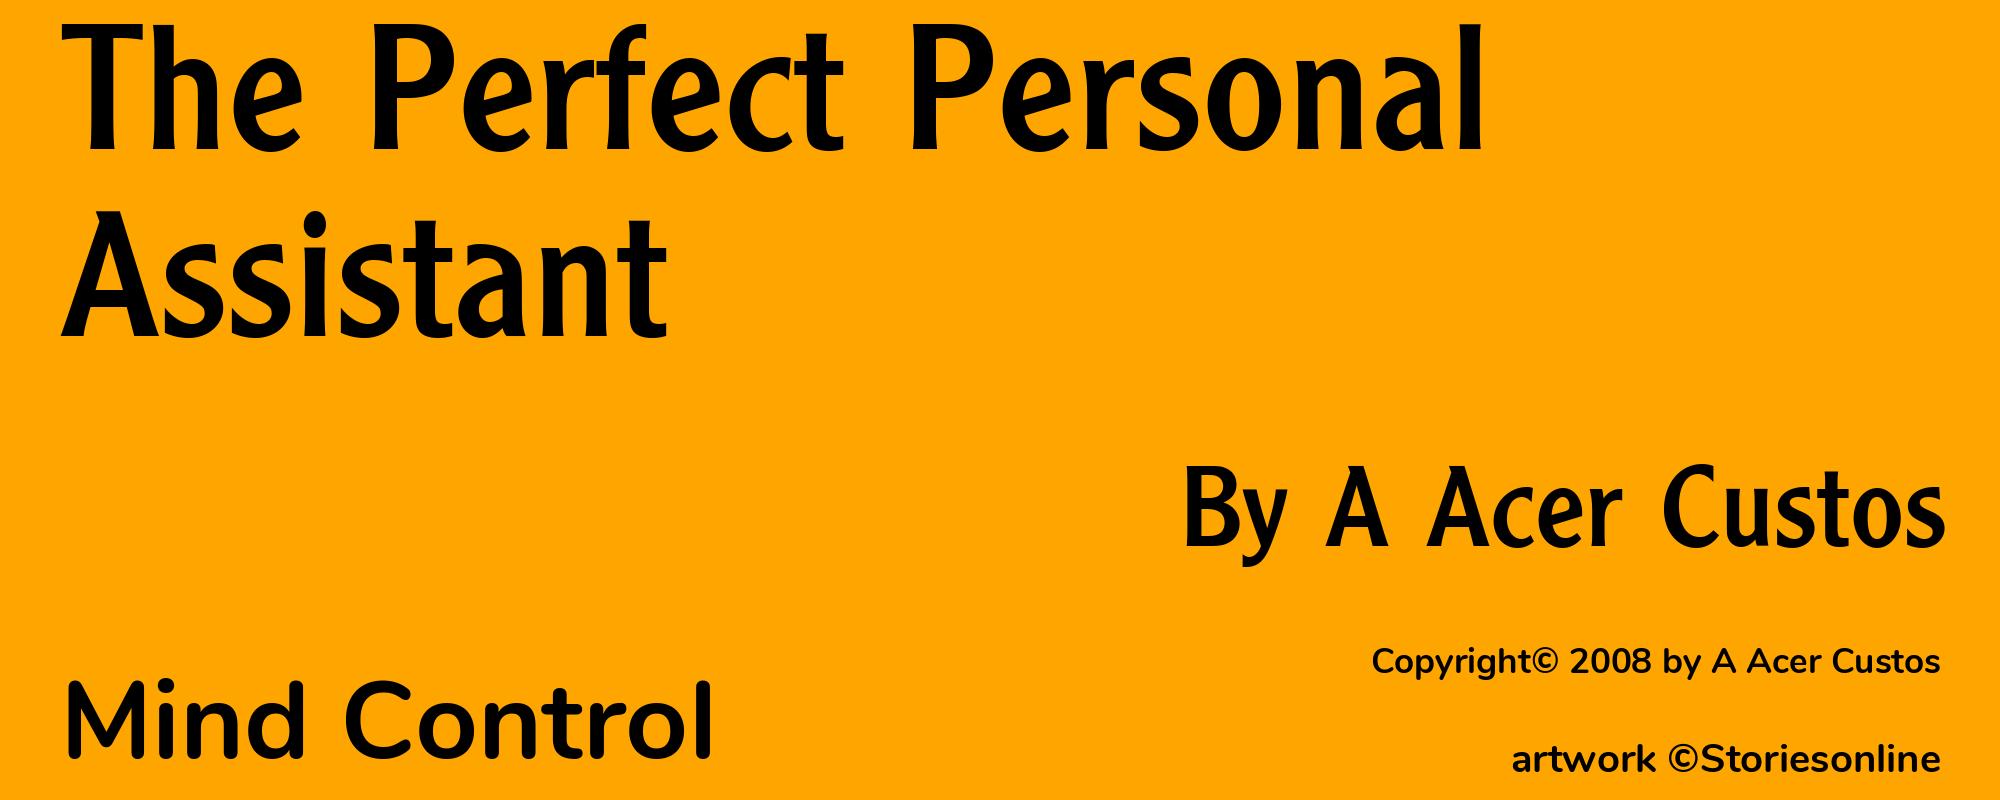 The Perfect Personal Assistant - Cover